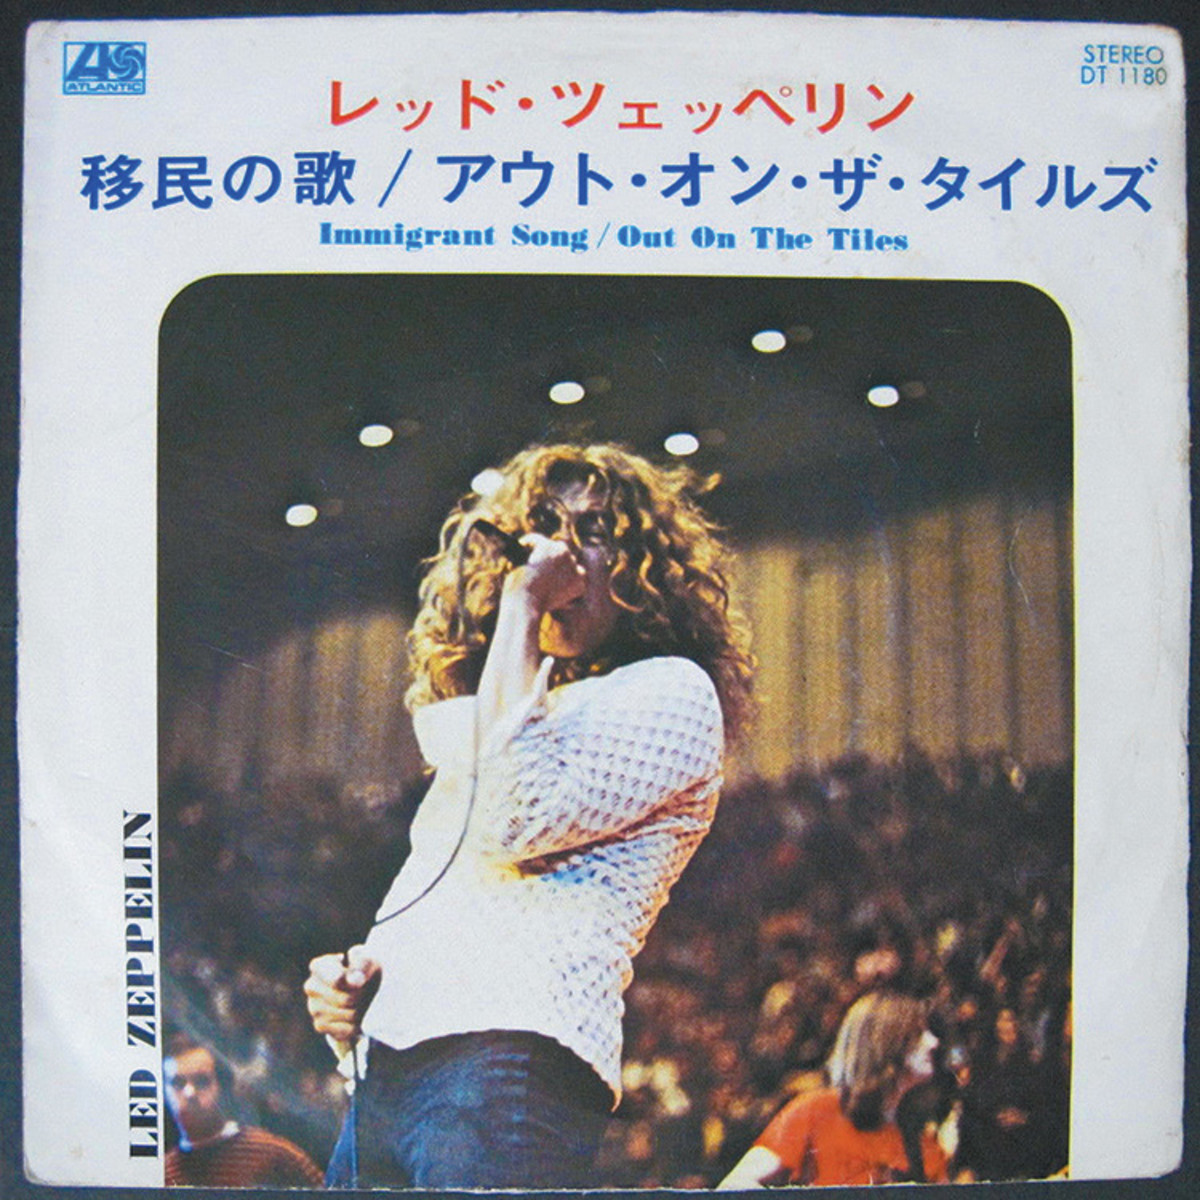 immigrant-song-japan